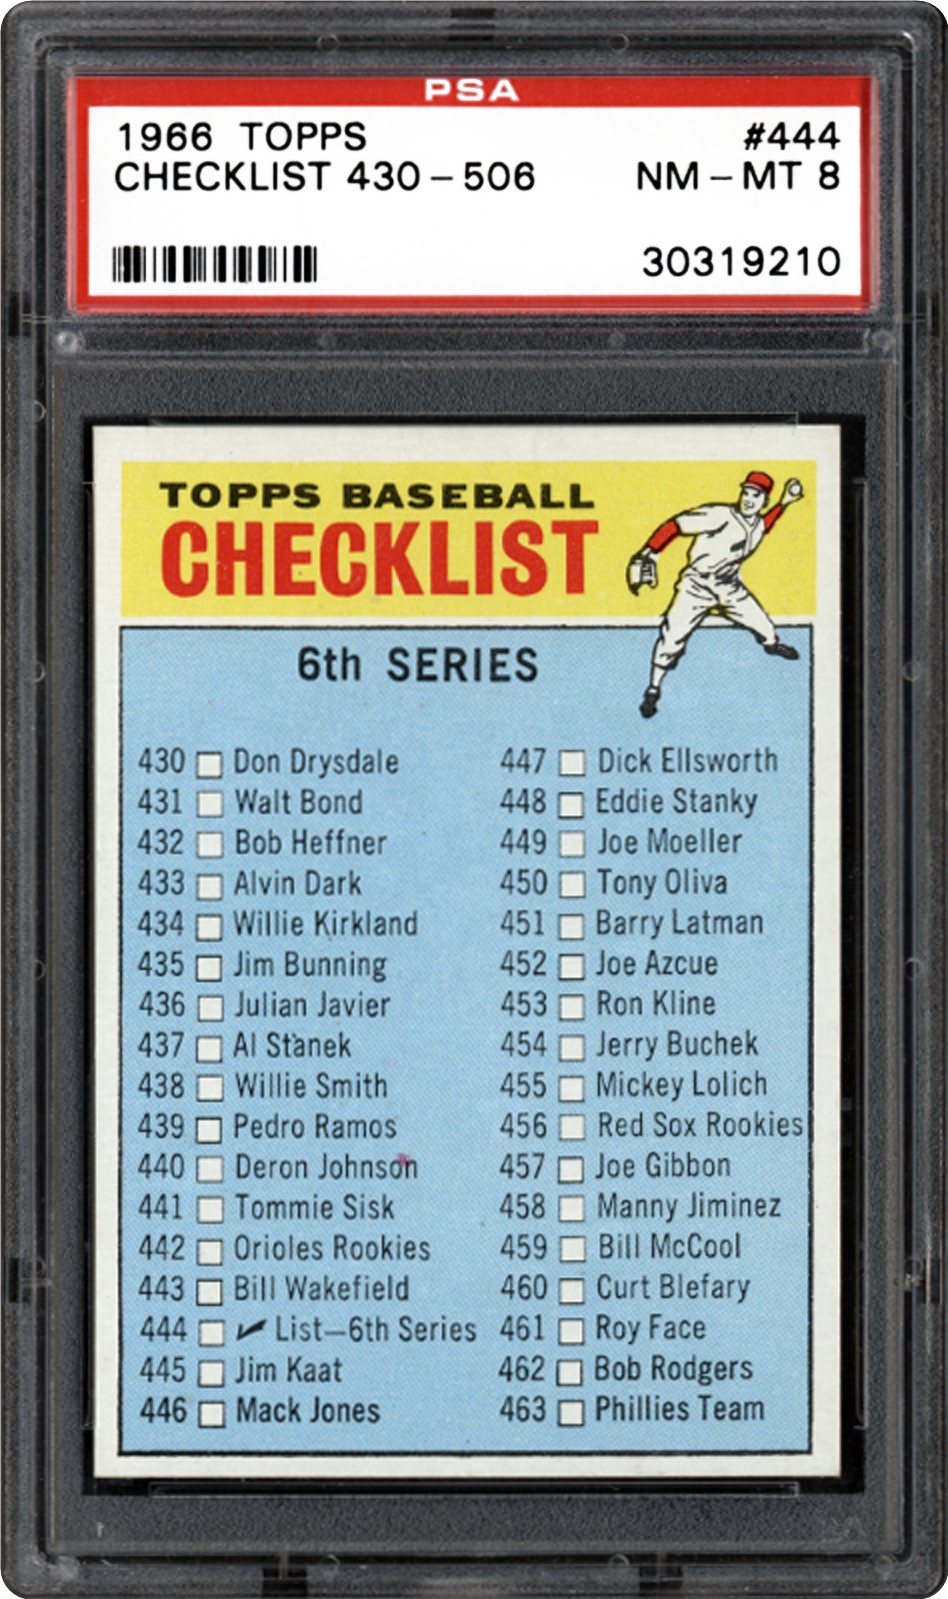 1966-topps-checklist-430-506-456-is-red-sox-rookies-psa-cardfacts